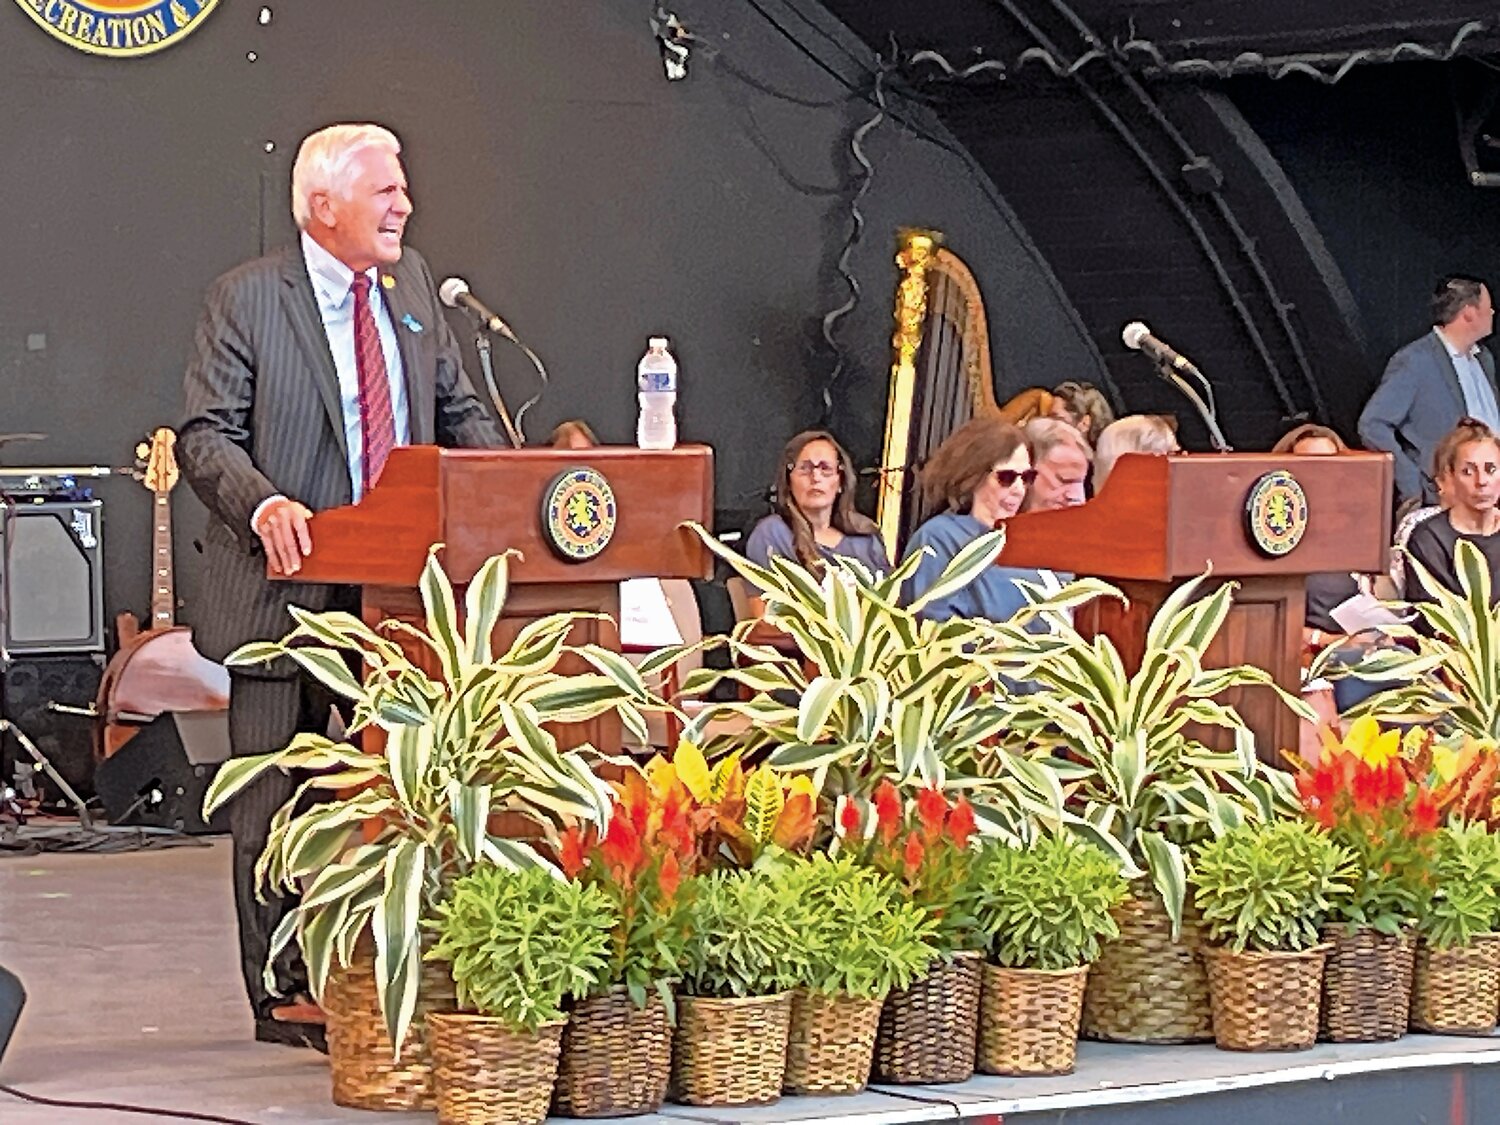 Nassau County Executive Bruce Blakeman told the crowd that gathered at Eisenhower Park’s Harry Chapin Lakeside Theatre to remember those we lost on or because of Sept. 11, 2001, and to continue to remember and comfort those they left behind.